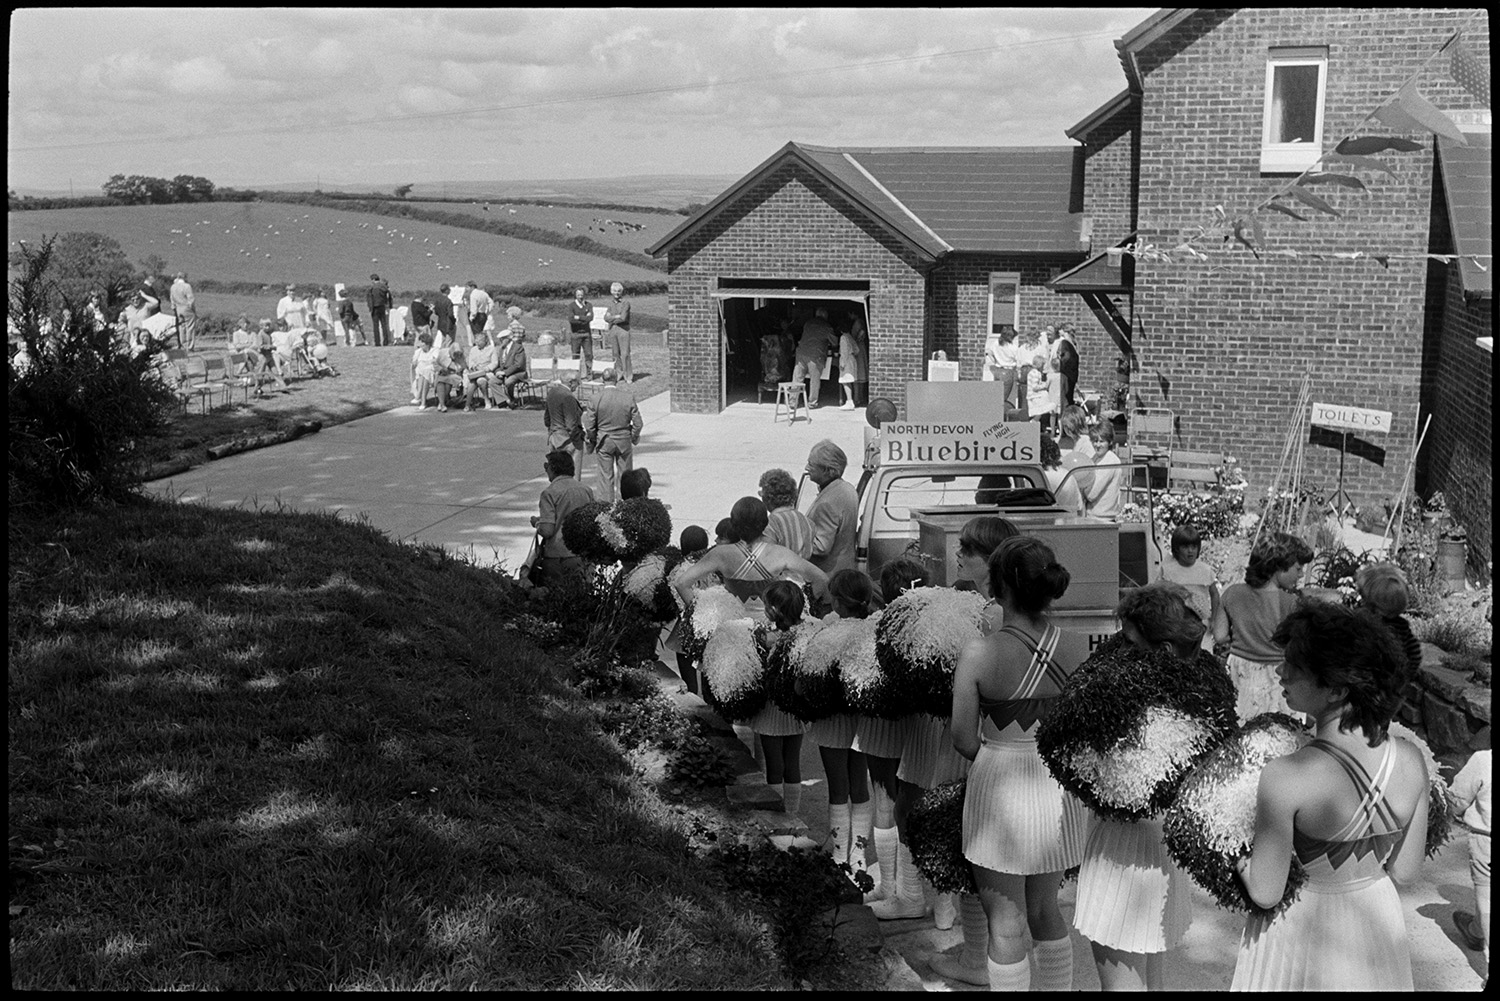 Fete stalls, games, majorettes. 
[The Bluebirds Majorettes getting ready to perform, with pom poms, at Atherington church fete held at the vicarage. People are gathered around outside the house to watch the performance.]